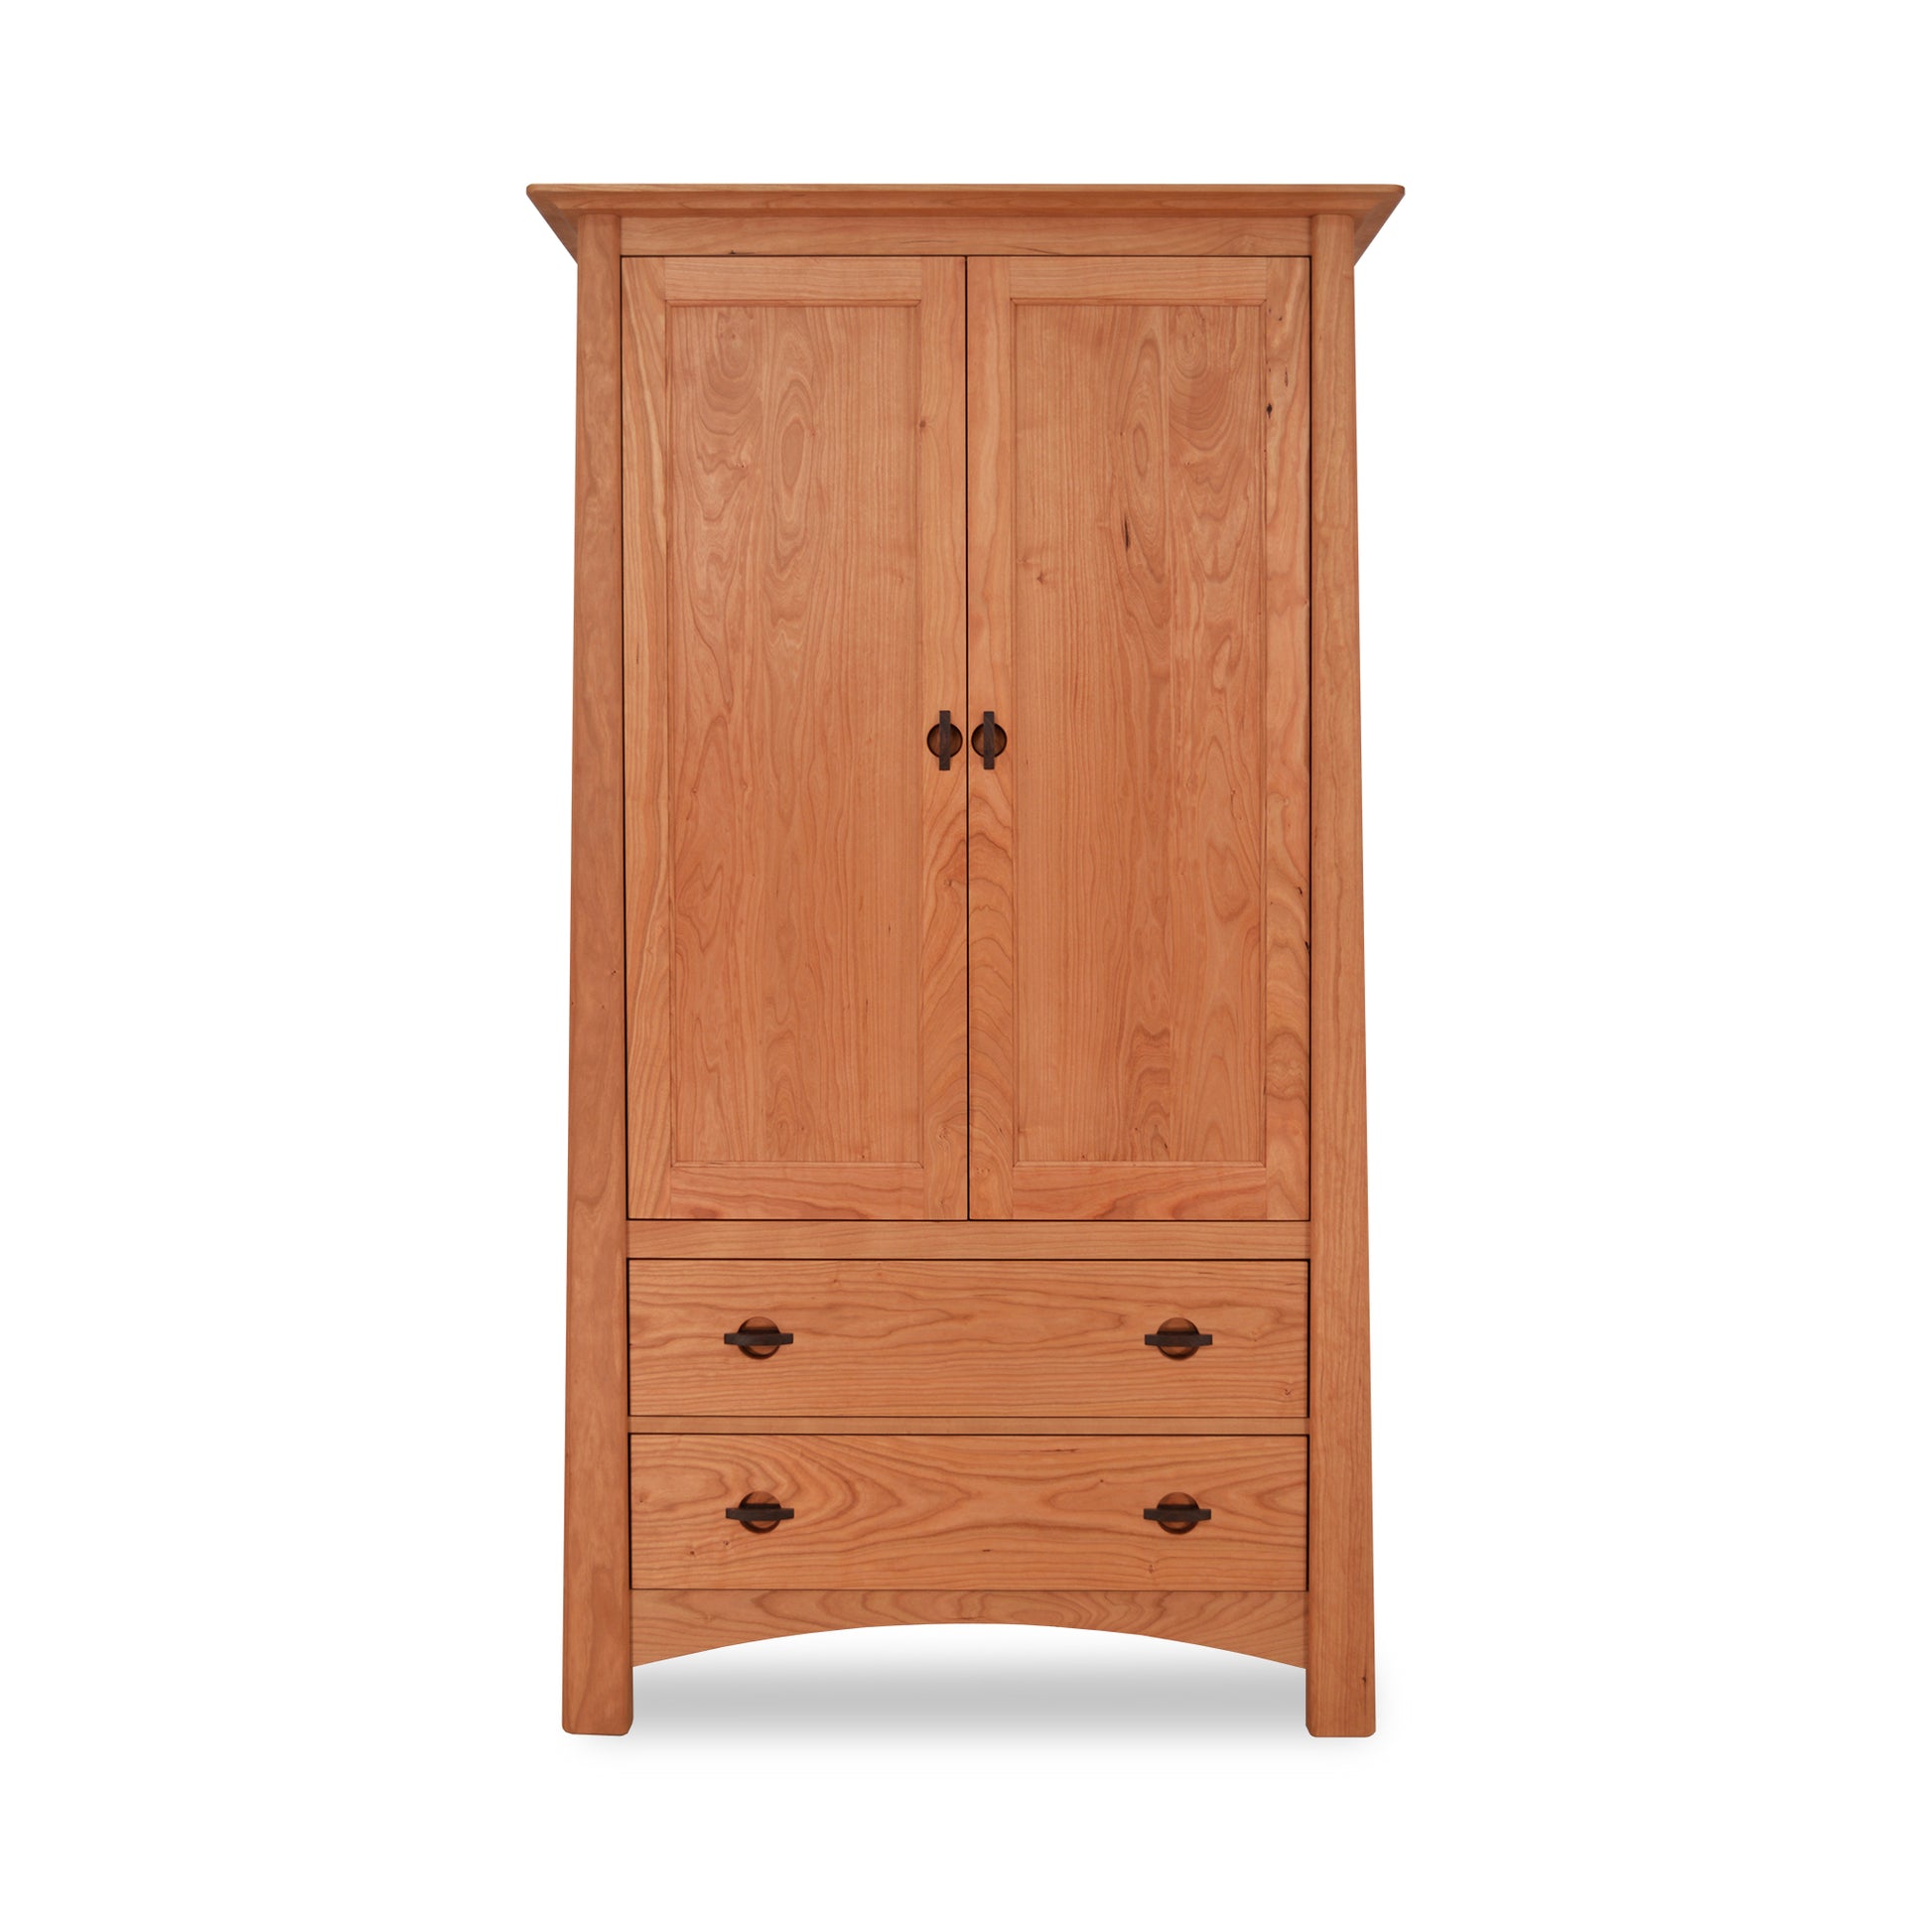 Maple Corner Woodworks Cherry Moon Armoire crafted from solid hardwood, with two doors and three lower drawers, isolated on a white background.